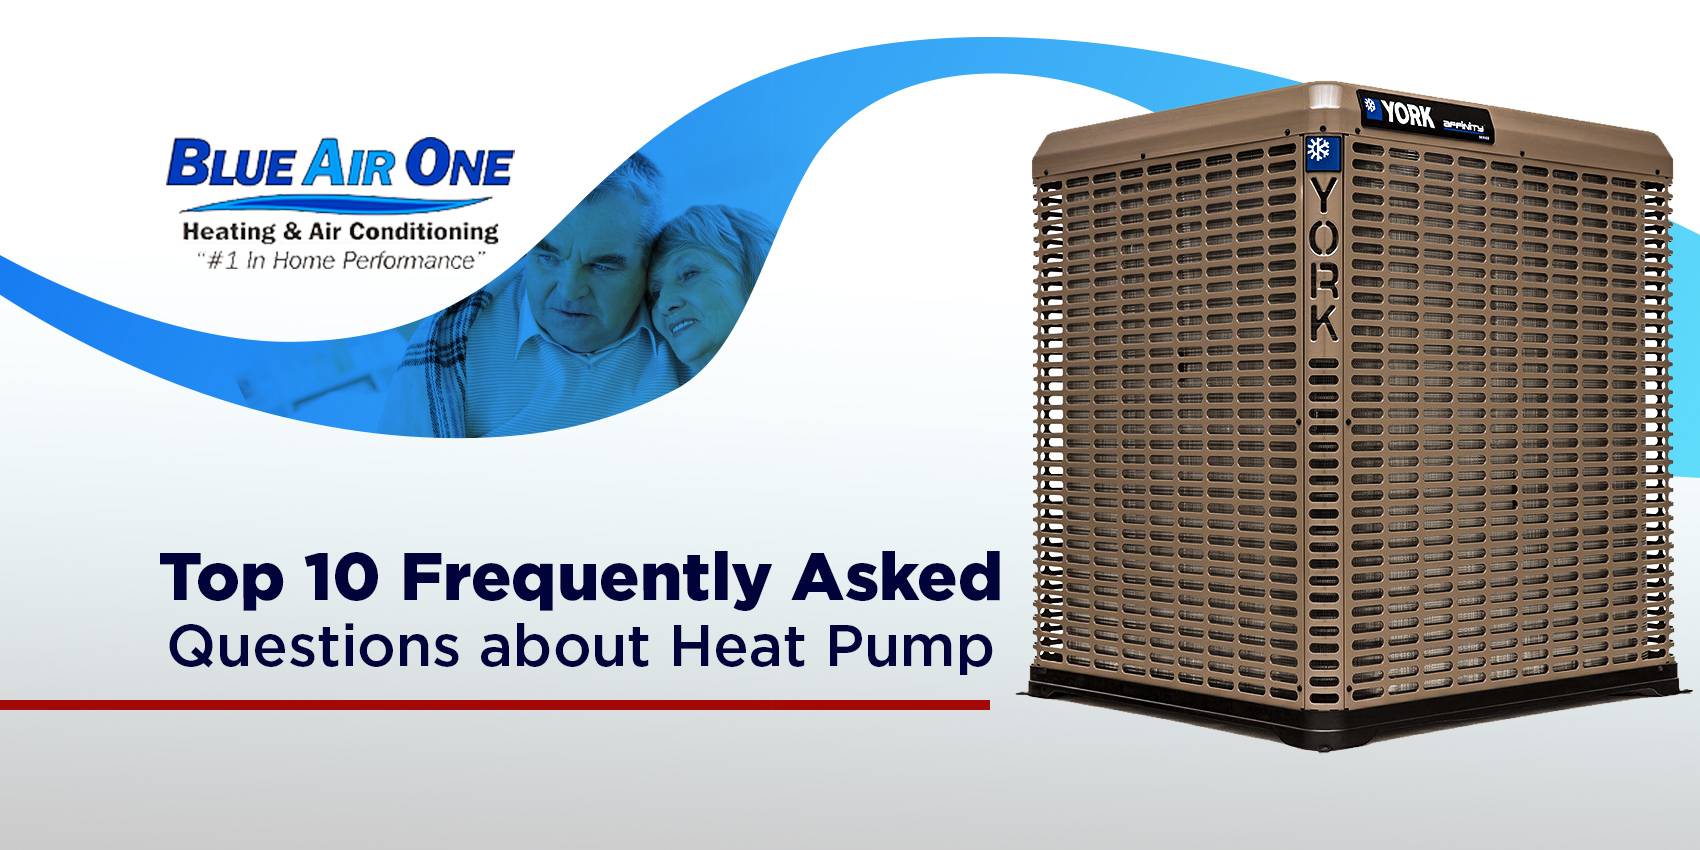 Top 10 Frequently Asked Questions about Heat Pump